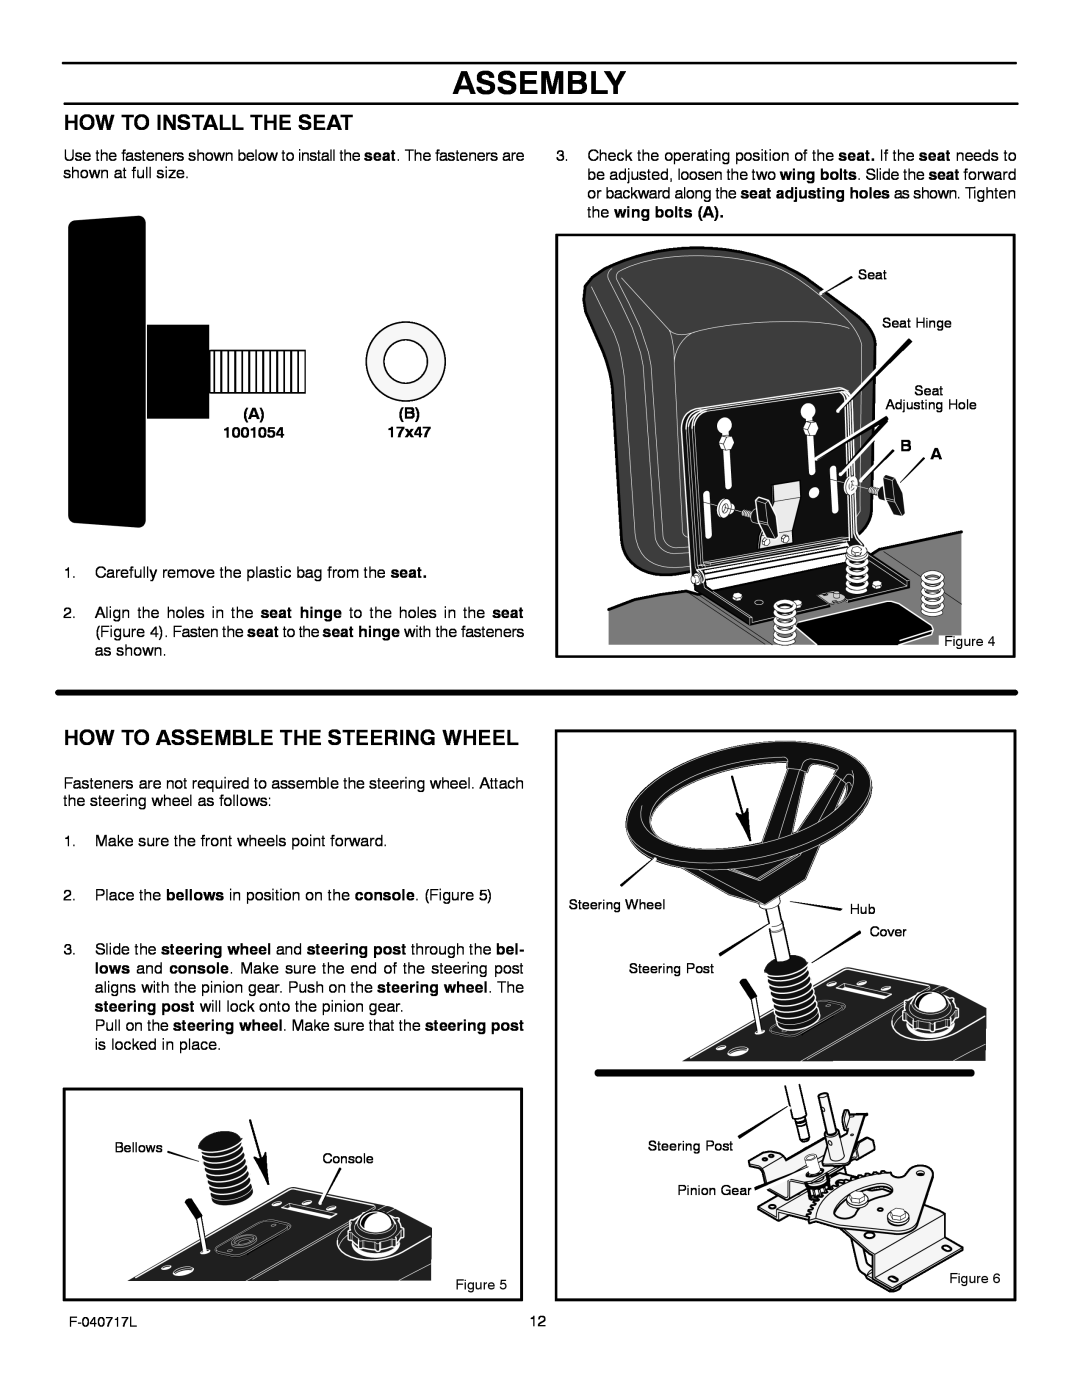 Murray 387002x92A manual Assembly, How To Install The Seat, How To Assemble The Steering Wheel 